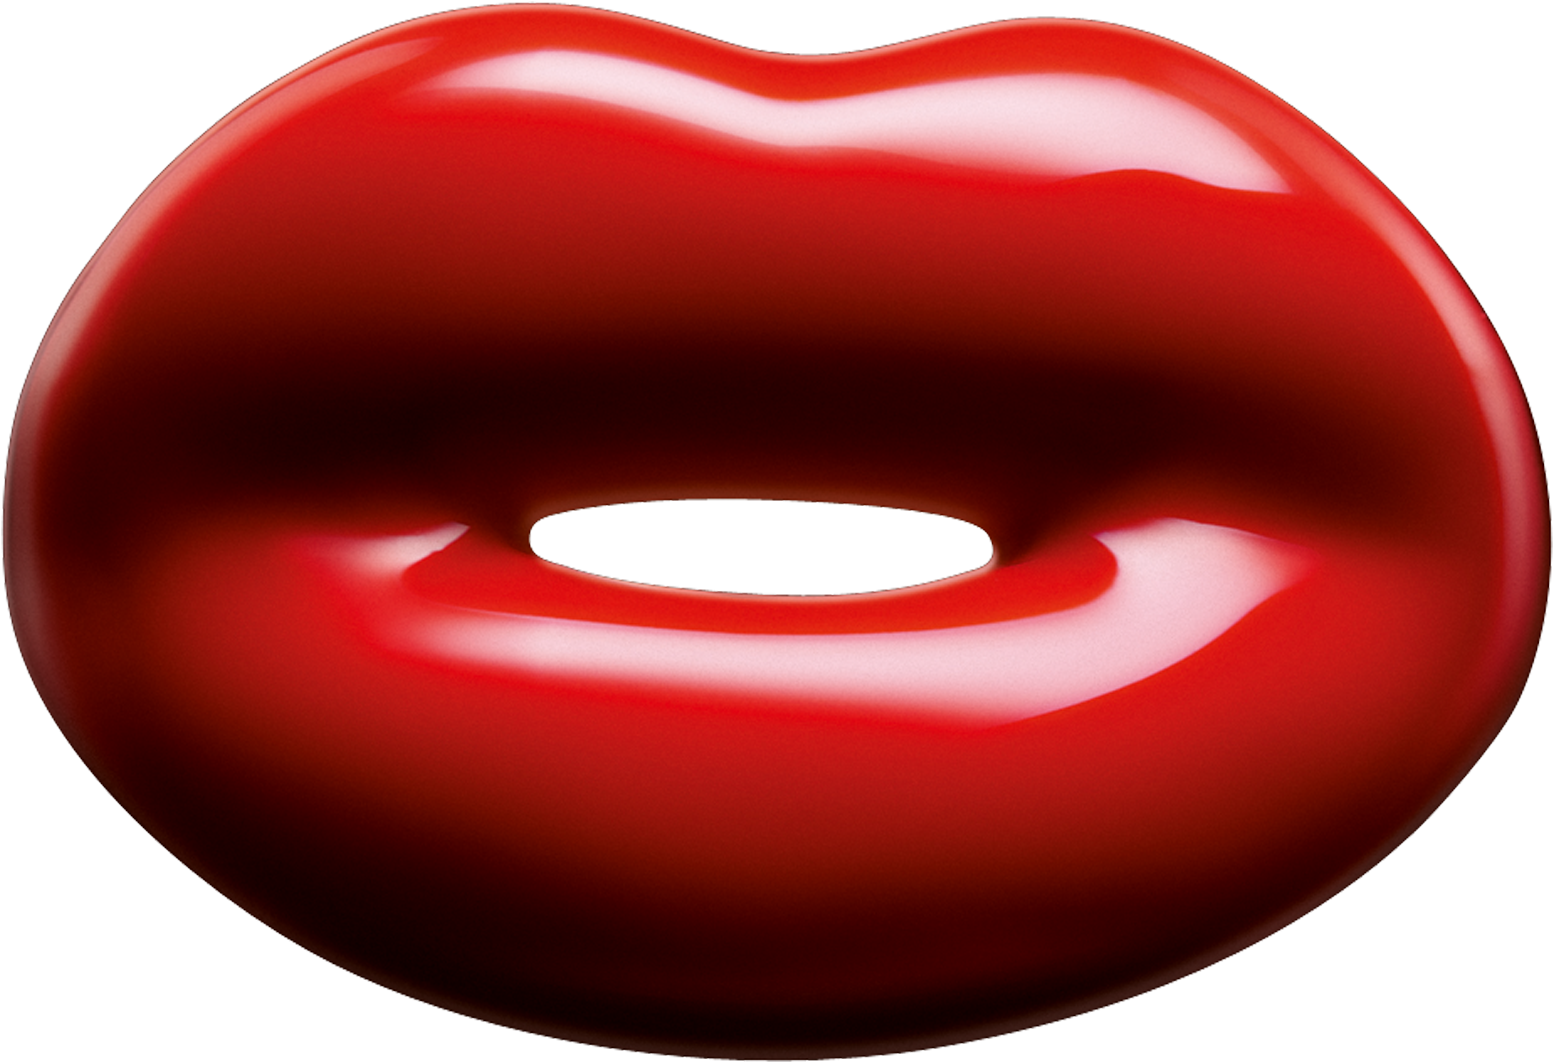 Red Hotlips Ring By Solange Azagury-partridge - Red Lip Ring (2500x1492)